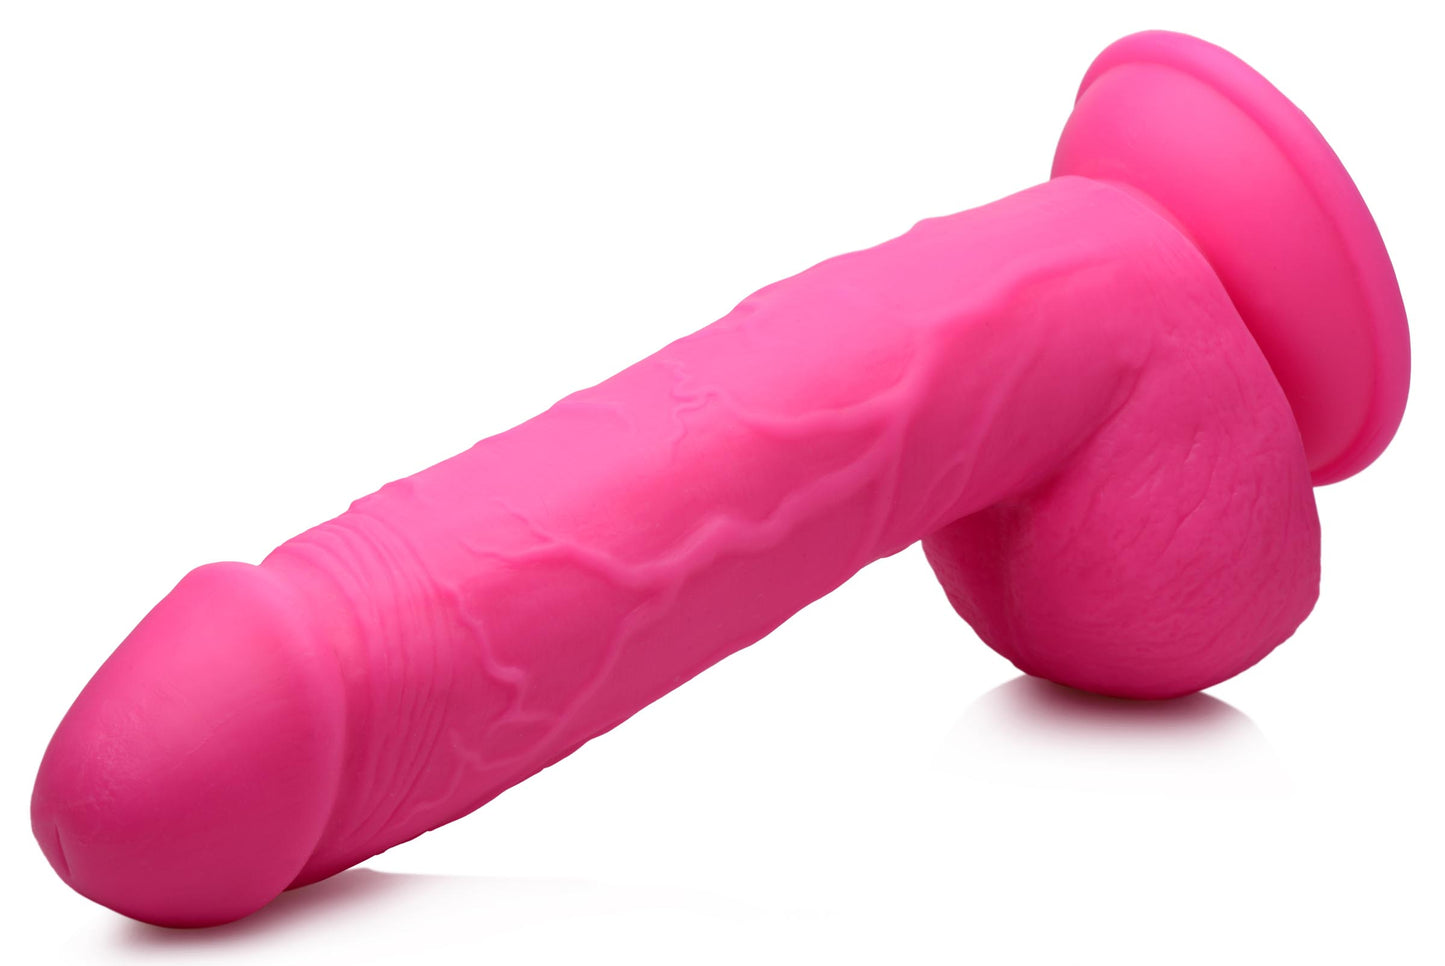 8.25 Inch Dildo with Balls - Pink